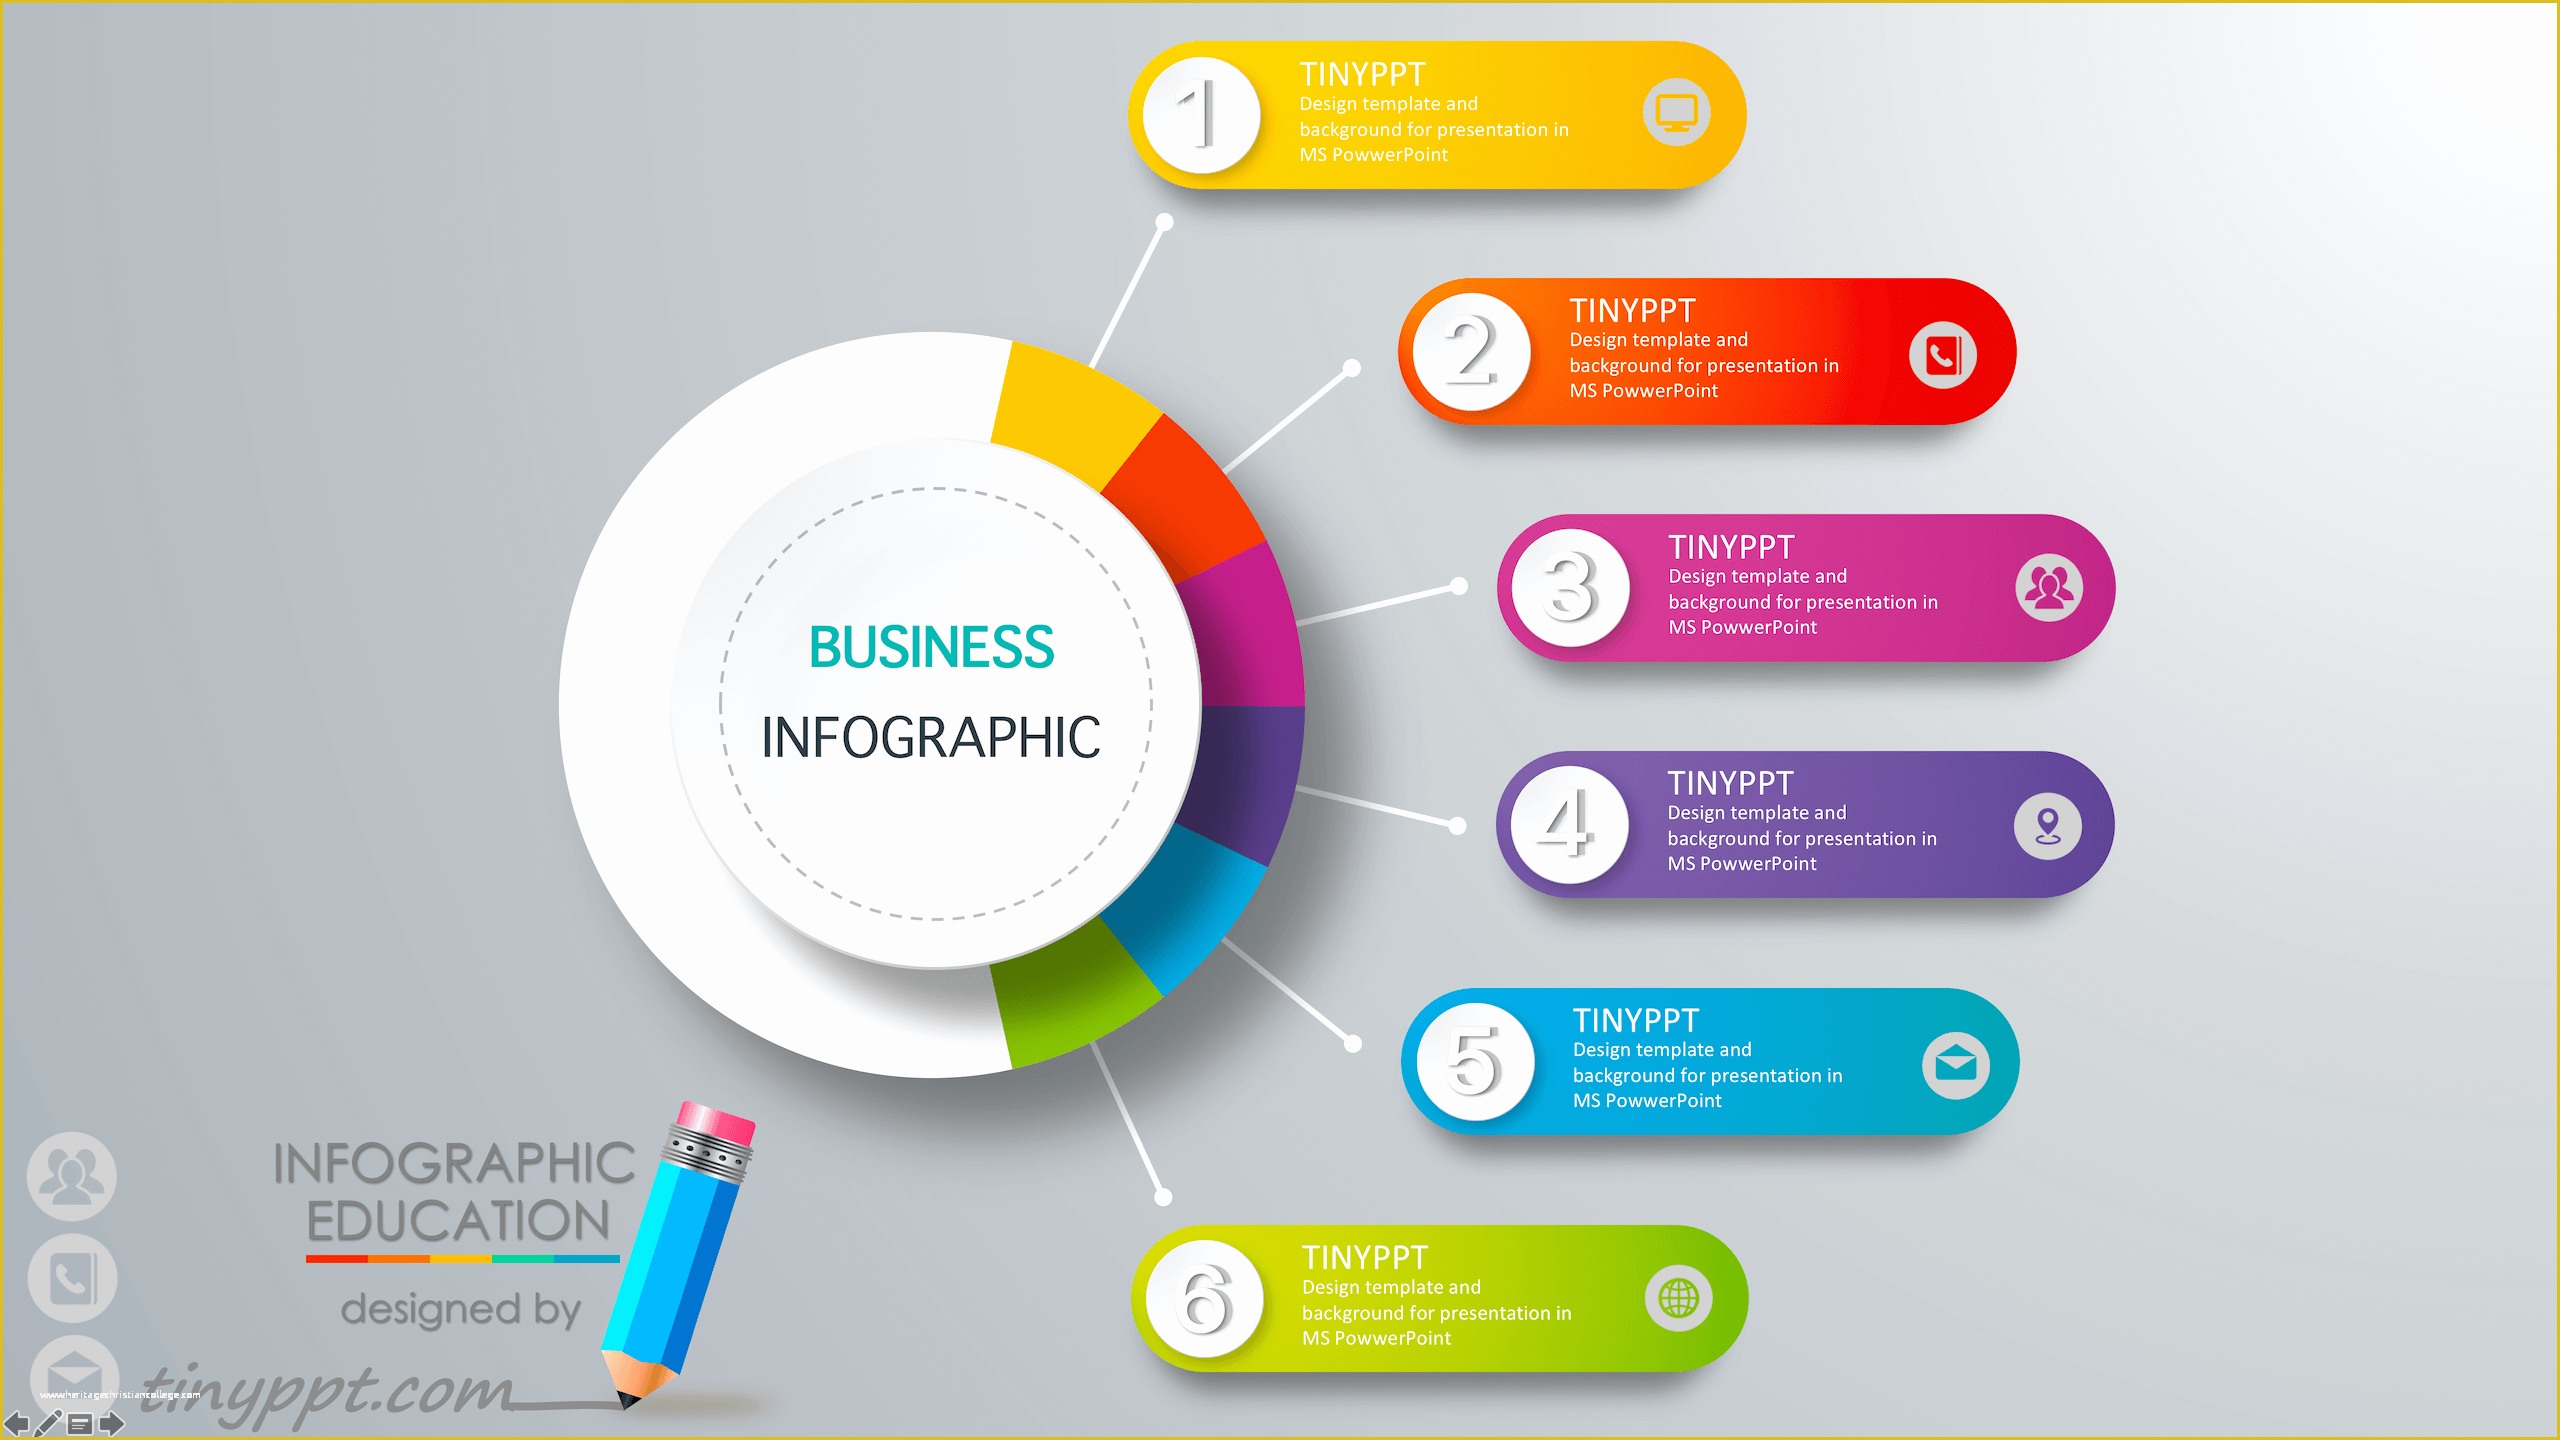 Microsoft Powerpoint Infographic Templates Free Of Powerpoint Infographic Icons Powerpoint Timeline Templates